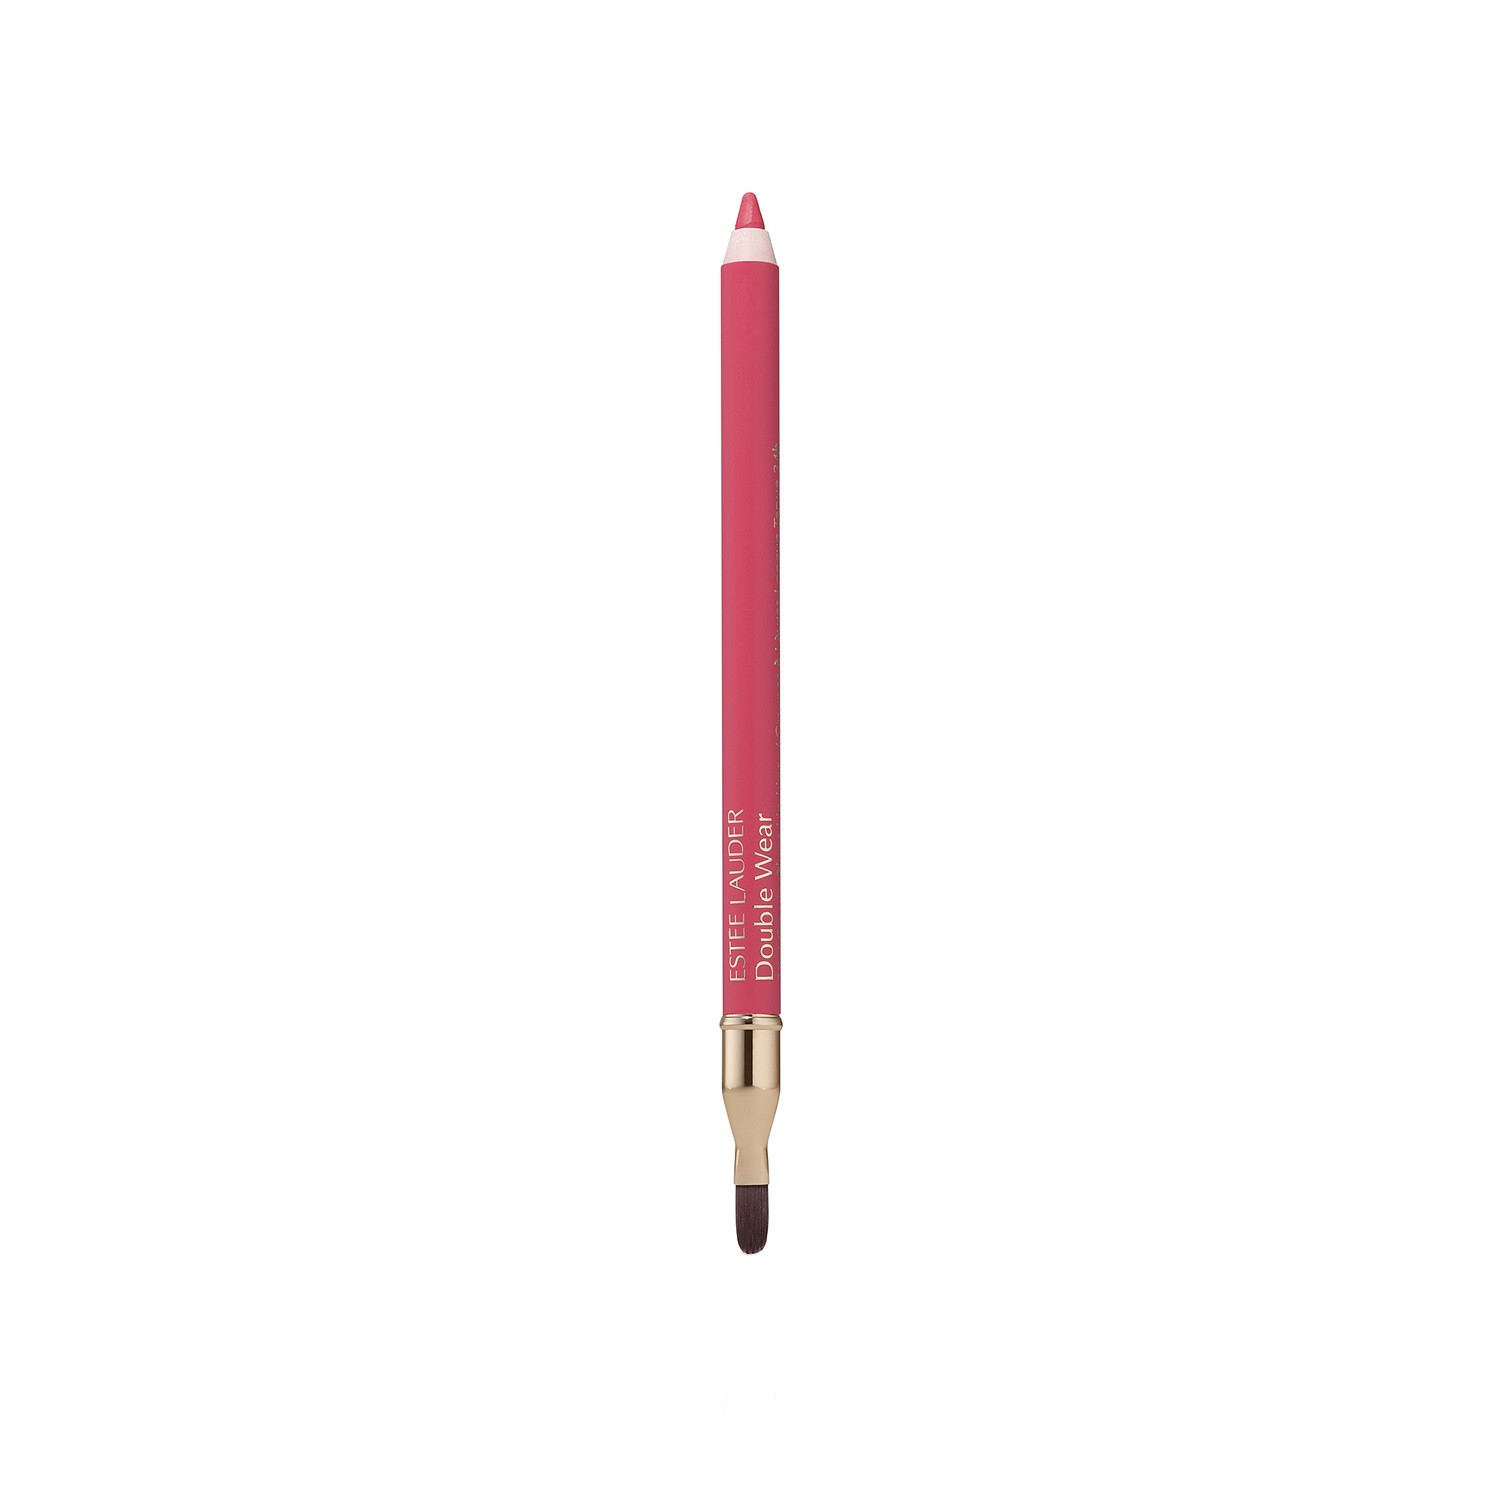 DOUBLE WEAR 24h stay-in-place lip liner - 011 Pink, Pink, large image number 0